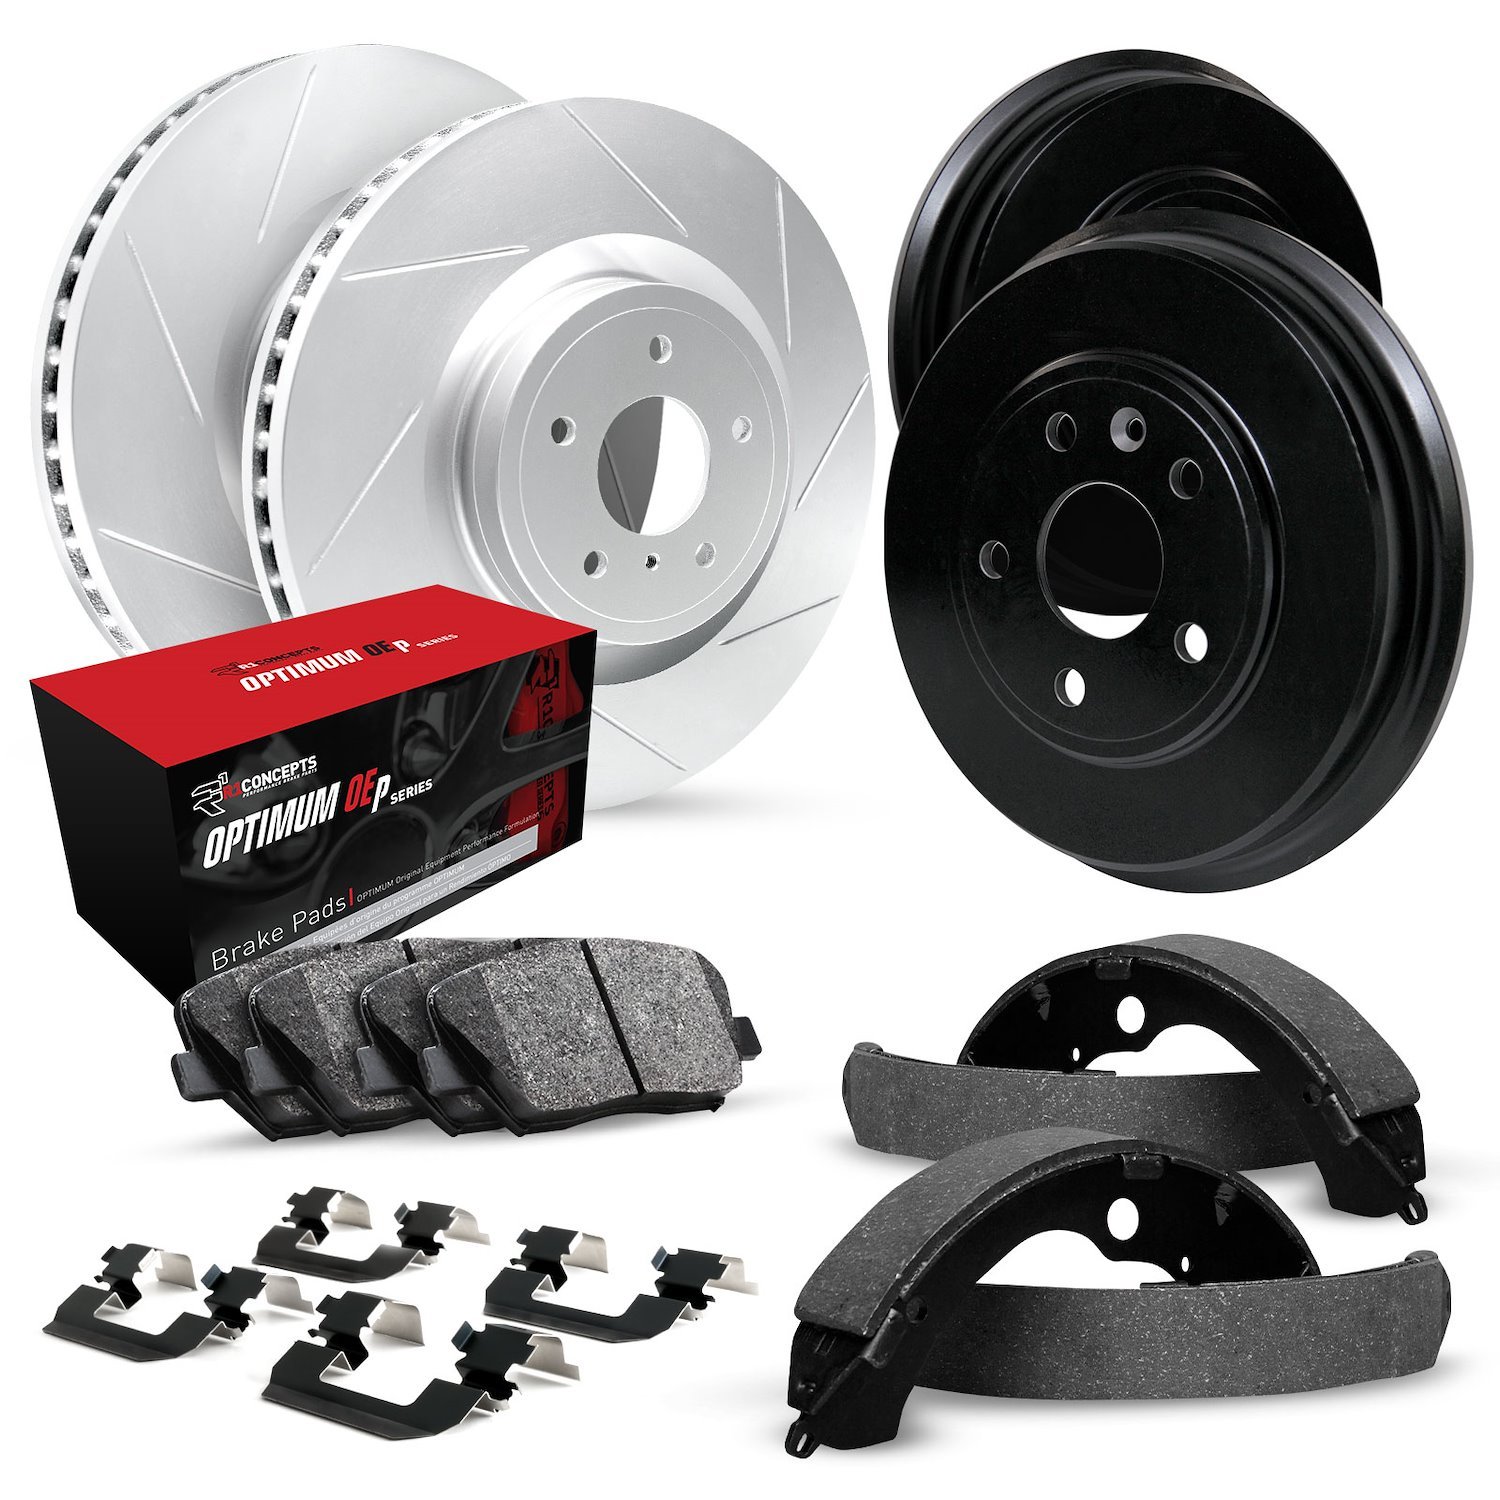 GEO-Carbon Slotted Brake Rotor & Drum Set w/Optimum OE Pads, Shoes, & Hardware, 1995-2000 GM, Position: Front & Rear